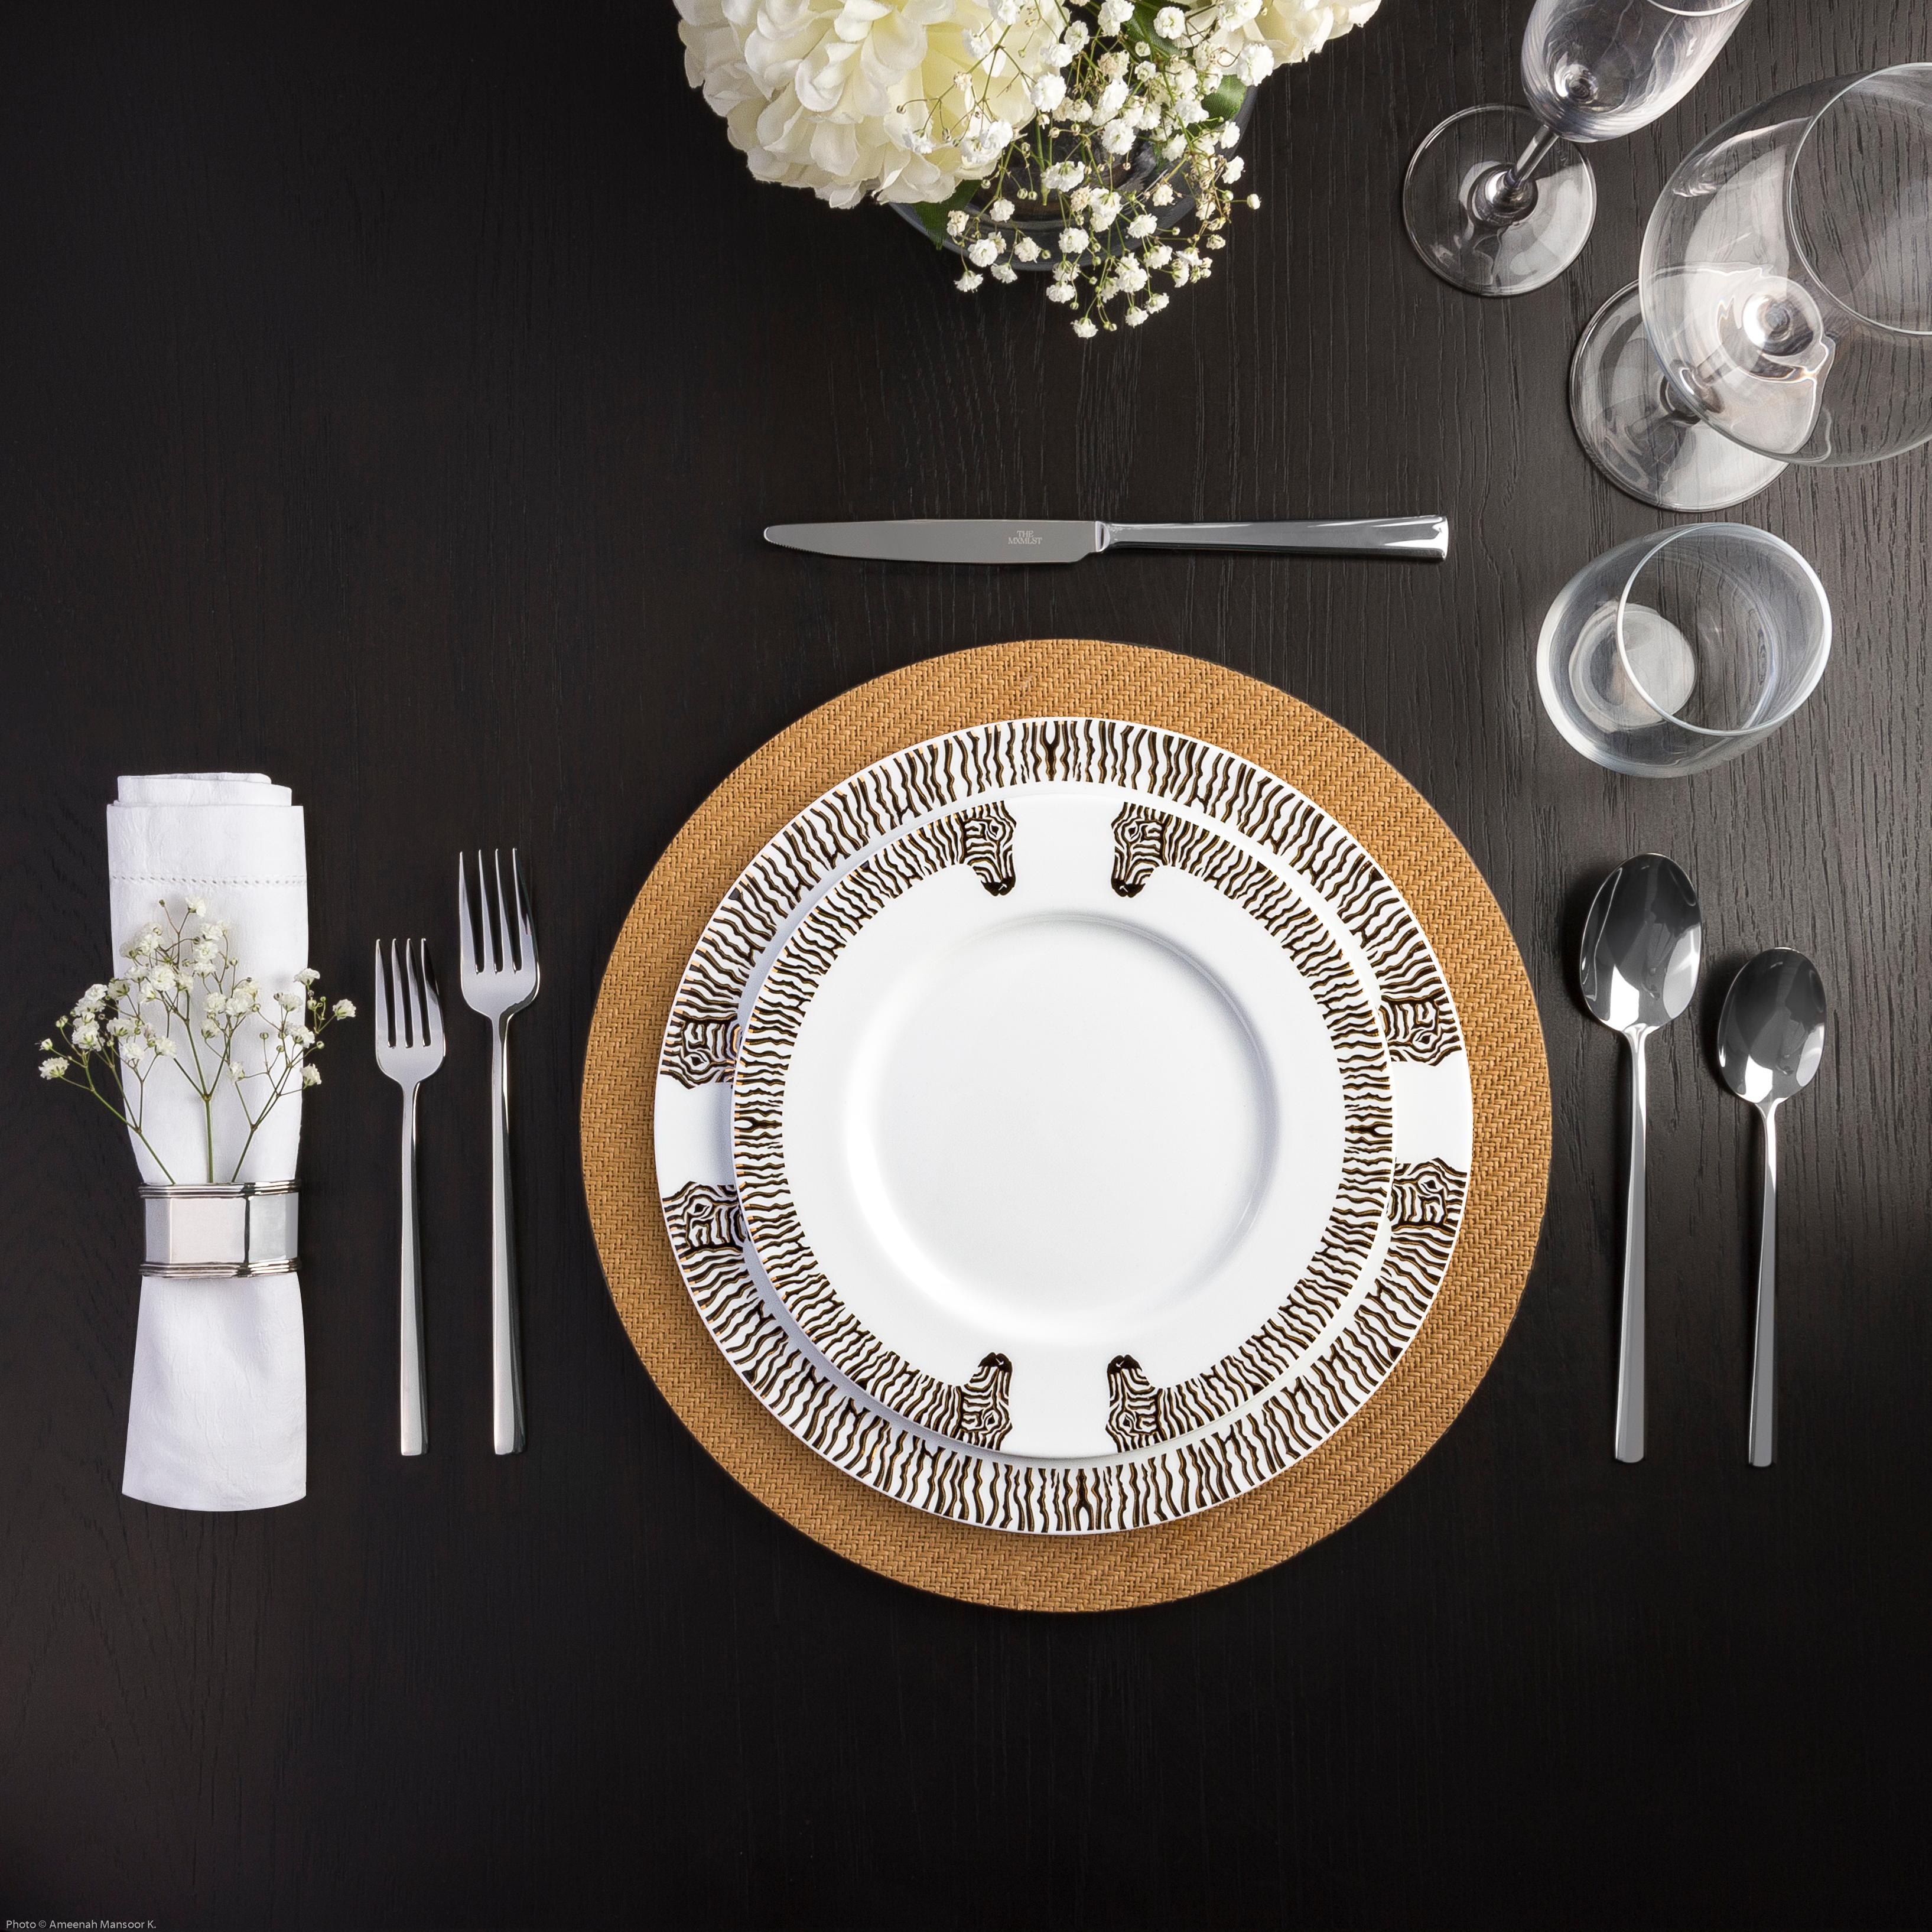 Influenced by the graphic black and white zebra print and the iconic David Webb, the Les Roux dinner set features a zebra that hugs the rim of the plate. Each black stripe is shadowed by a layer of 12k gold to add a touch of luxury to this dinner